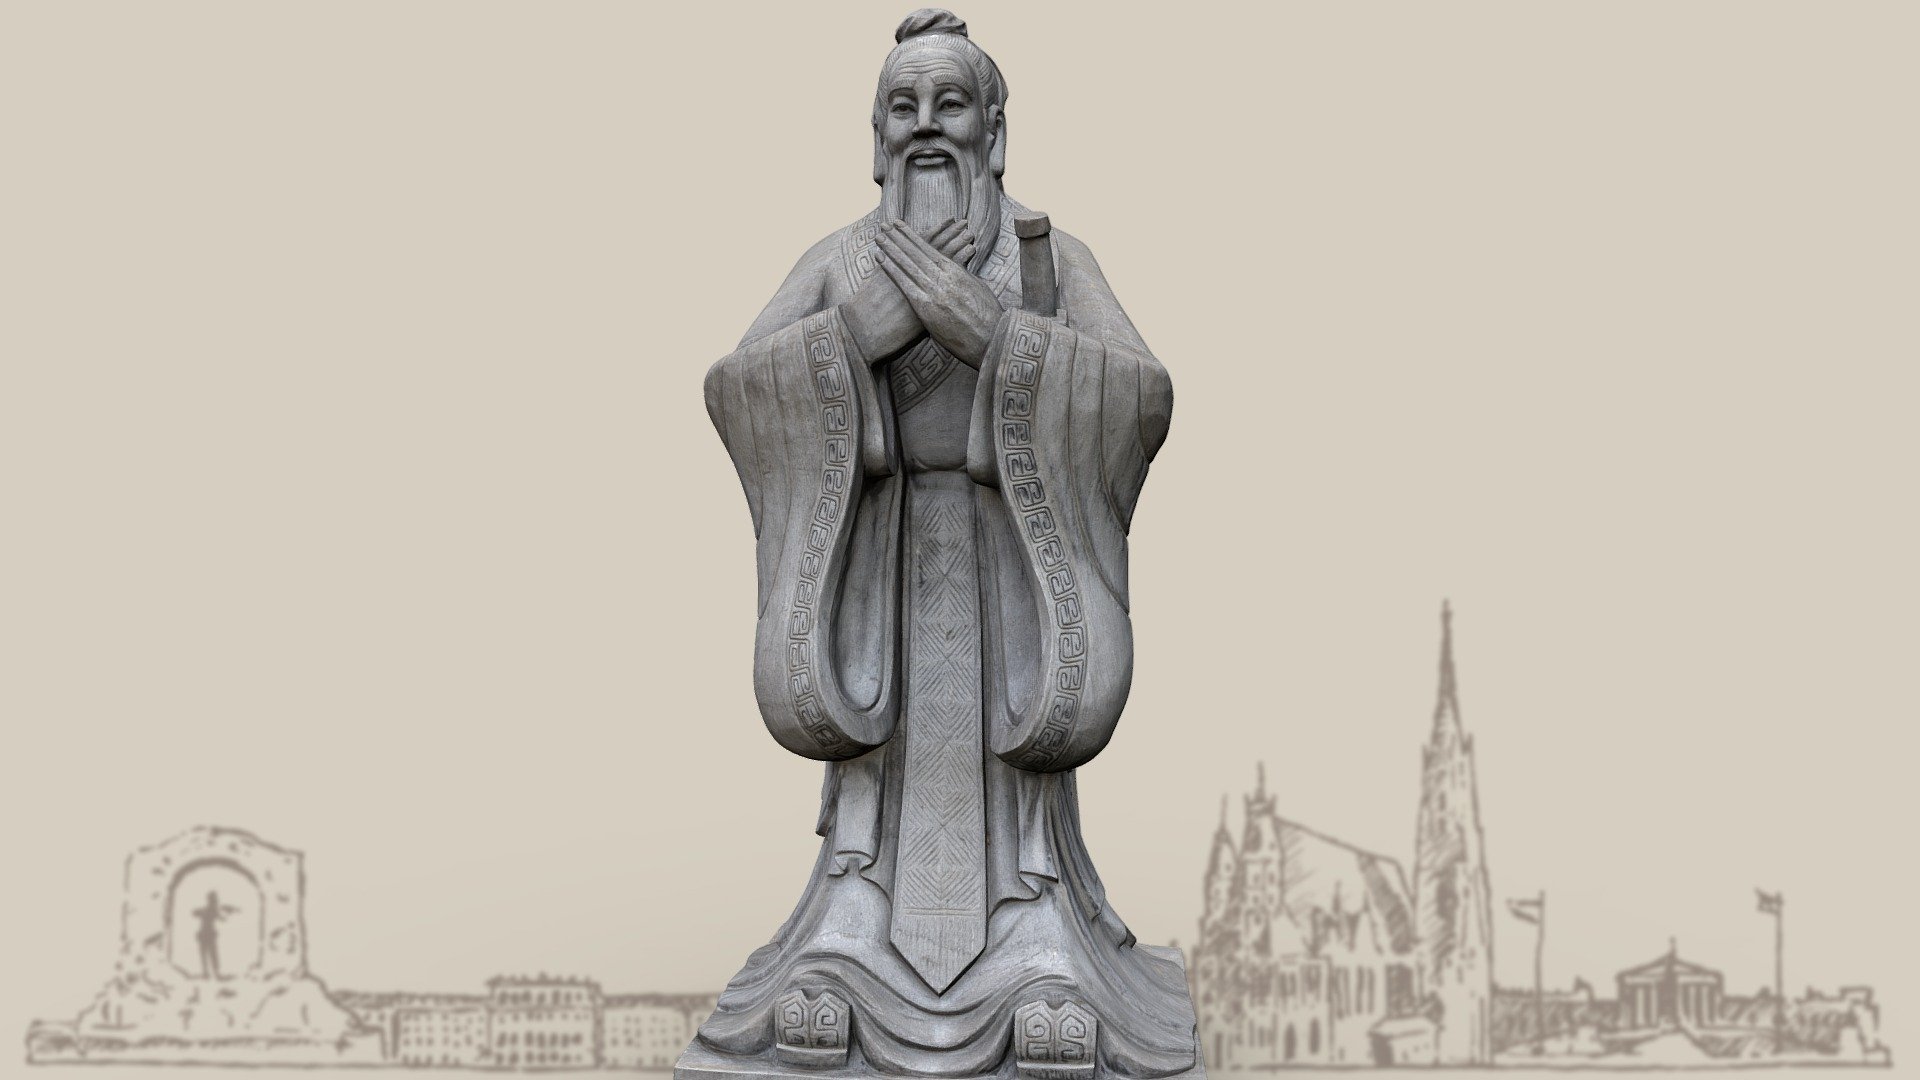 Statue of the philosopher Confucius in the Hirschstetten flower gardens in Vienna's 22nd district.

Confucius was a Chinese philosopher at the time of the Eastern Zhou Dynasty. The central theme of his teachings was human order, which he believed could be achieved through respect for others and ancestor worship 3d model